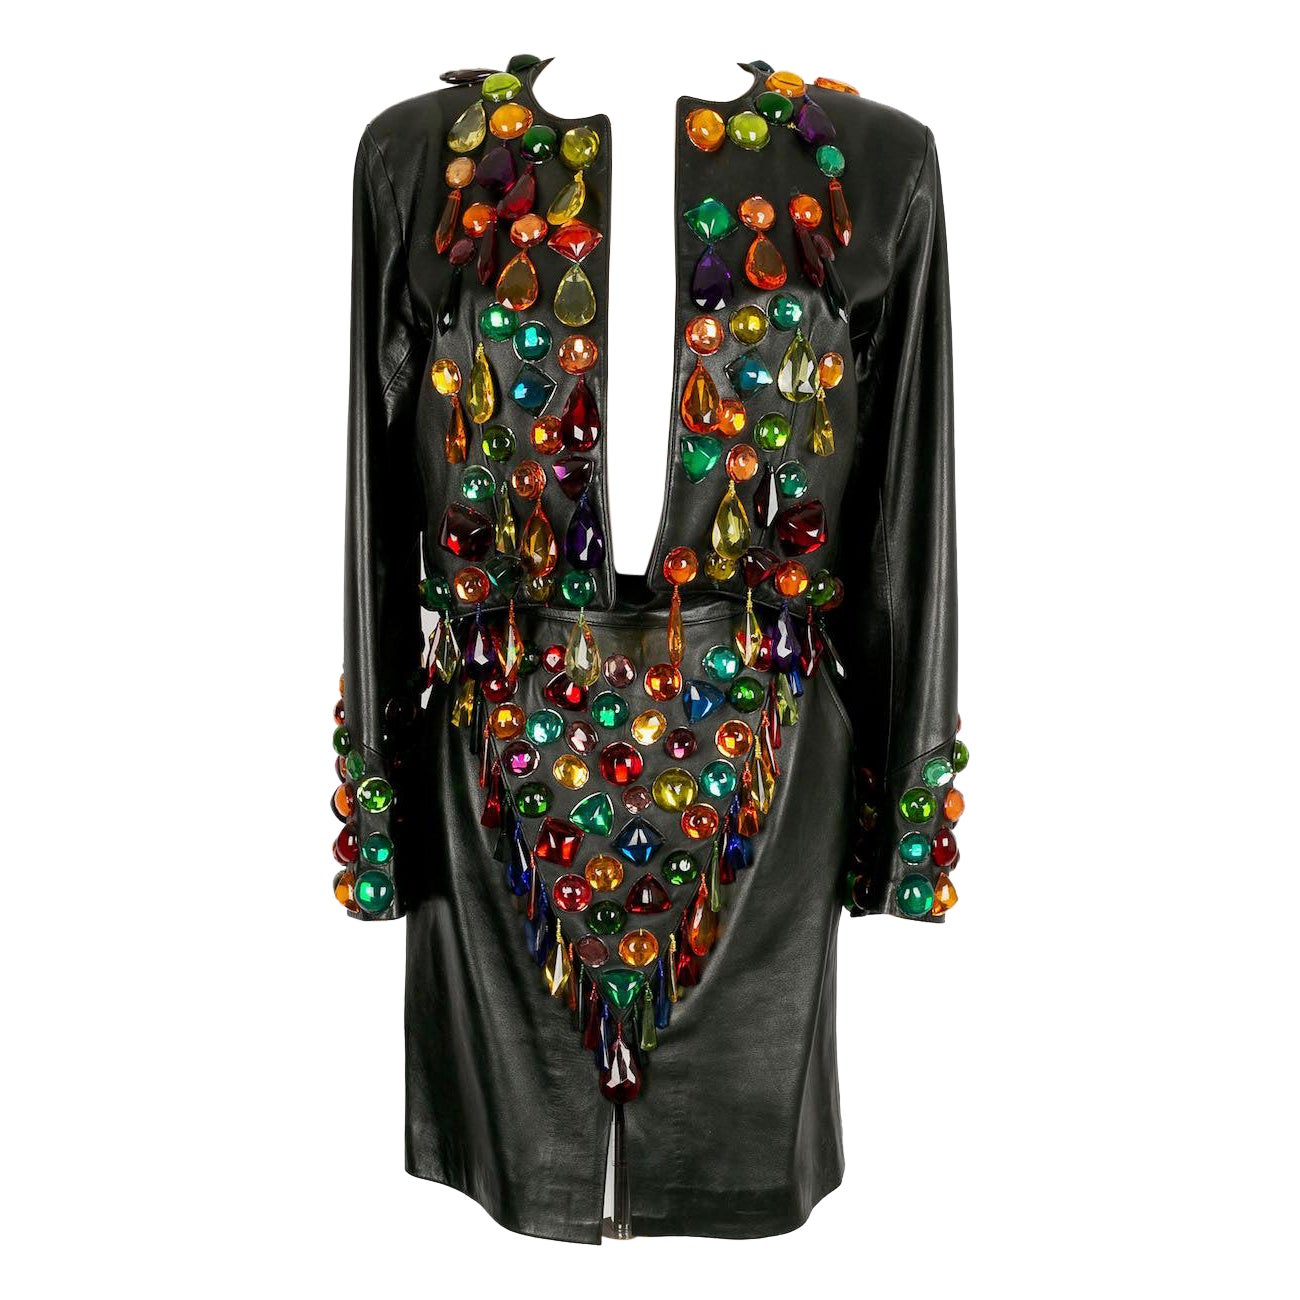 Yves Saint Laurent Leather Suit with Tassels, 1990 For Sale